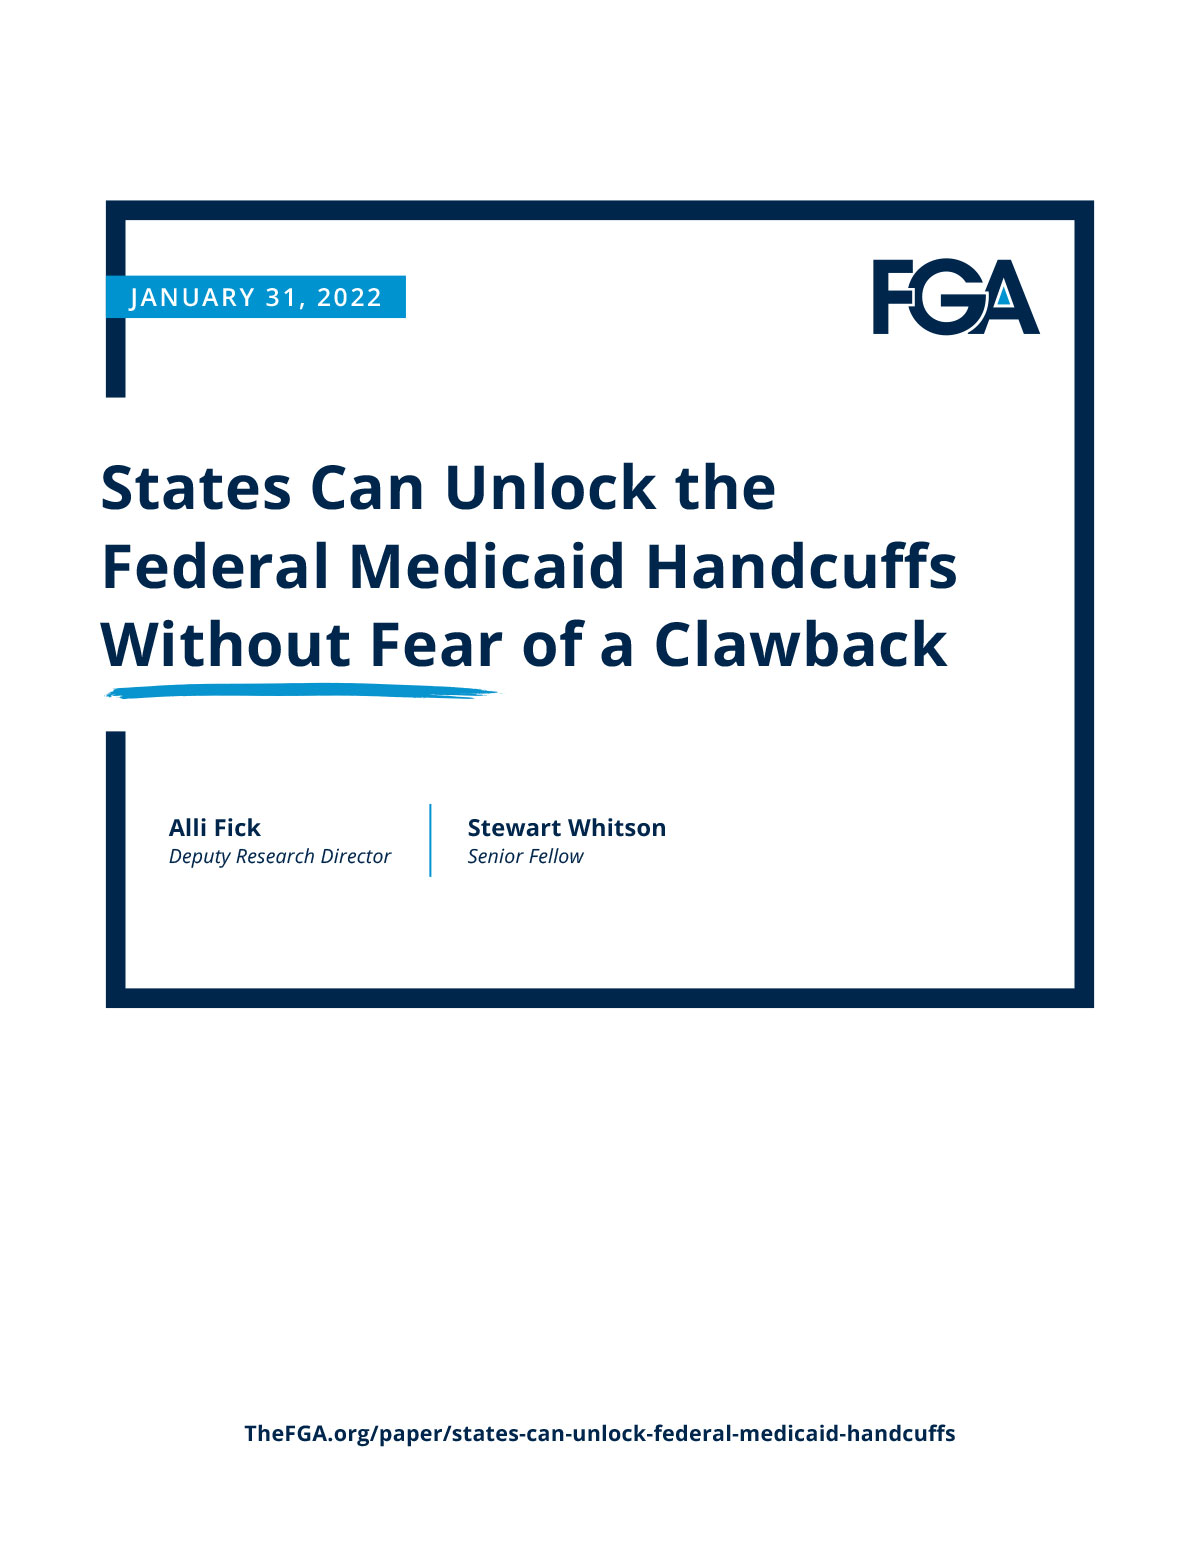 States Can Unlock the Federal Medicaid Handcuffs Without Fear of a Clawback